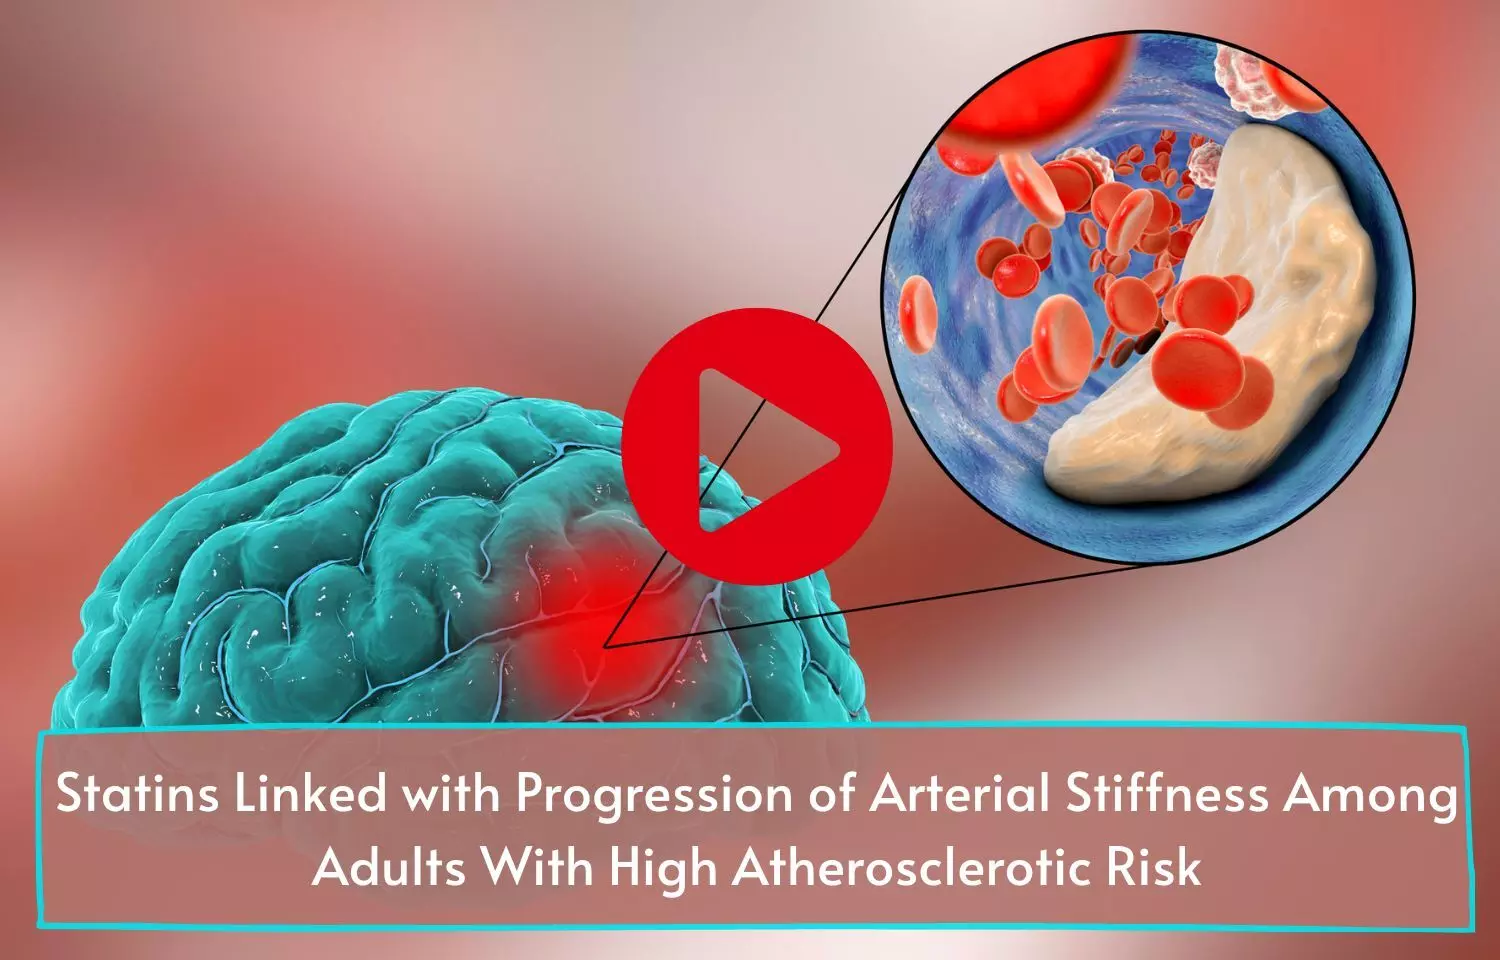 Statins Linked with Progression of Arterial Stiffness Among Adults With High Atherosclerotic Risk